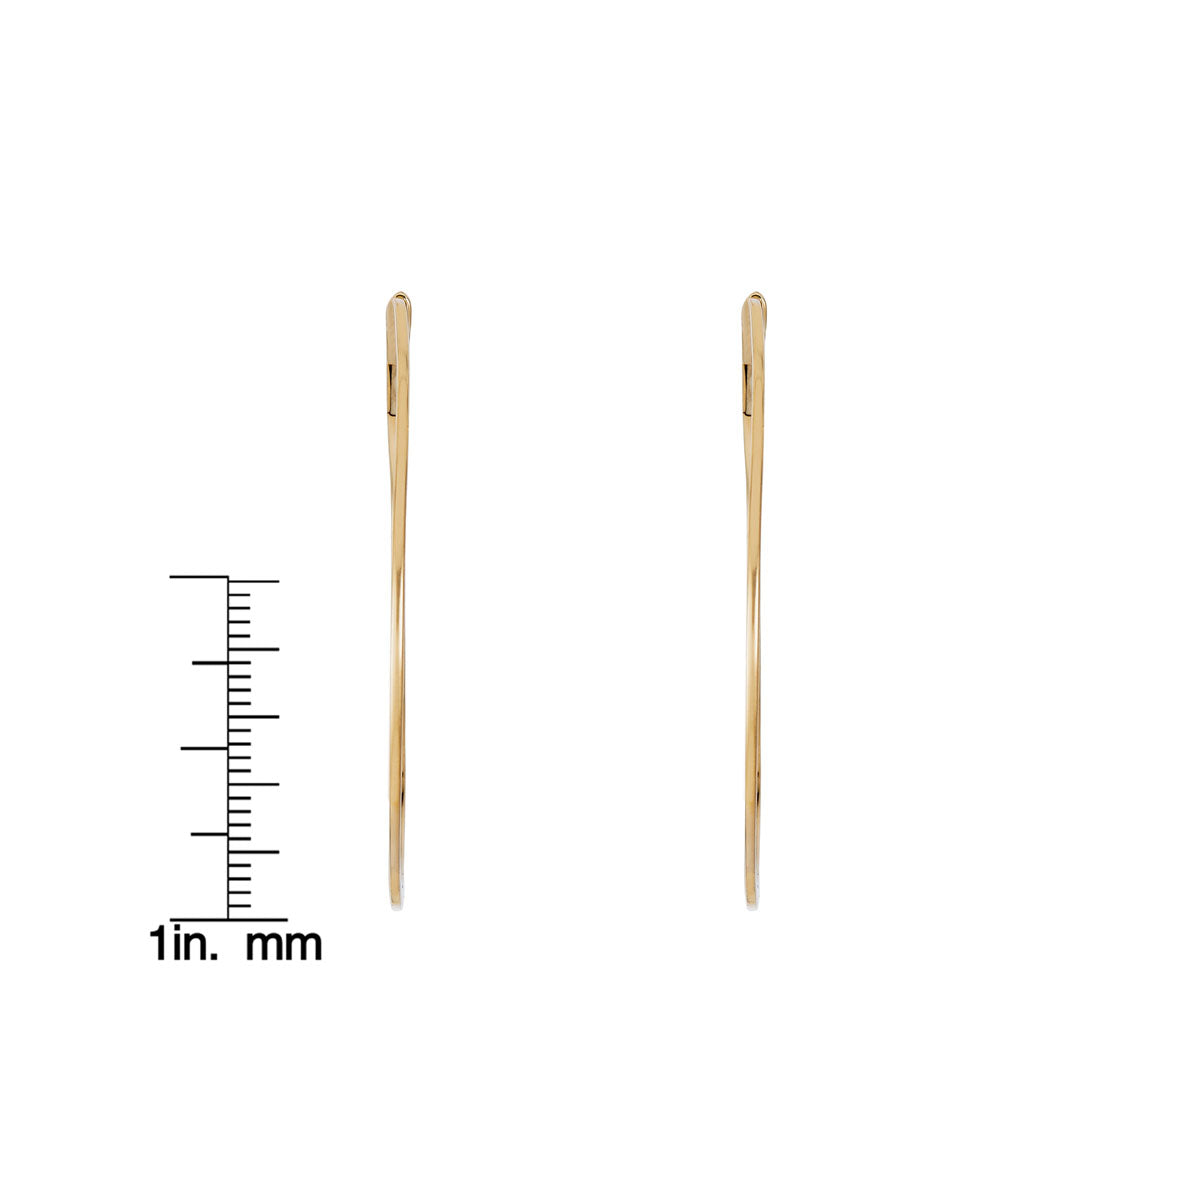 1 inch three quarters gold skinny gold hoop earrings with ruler